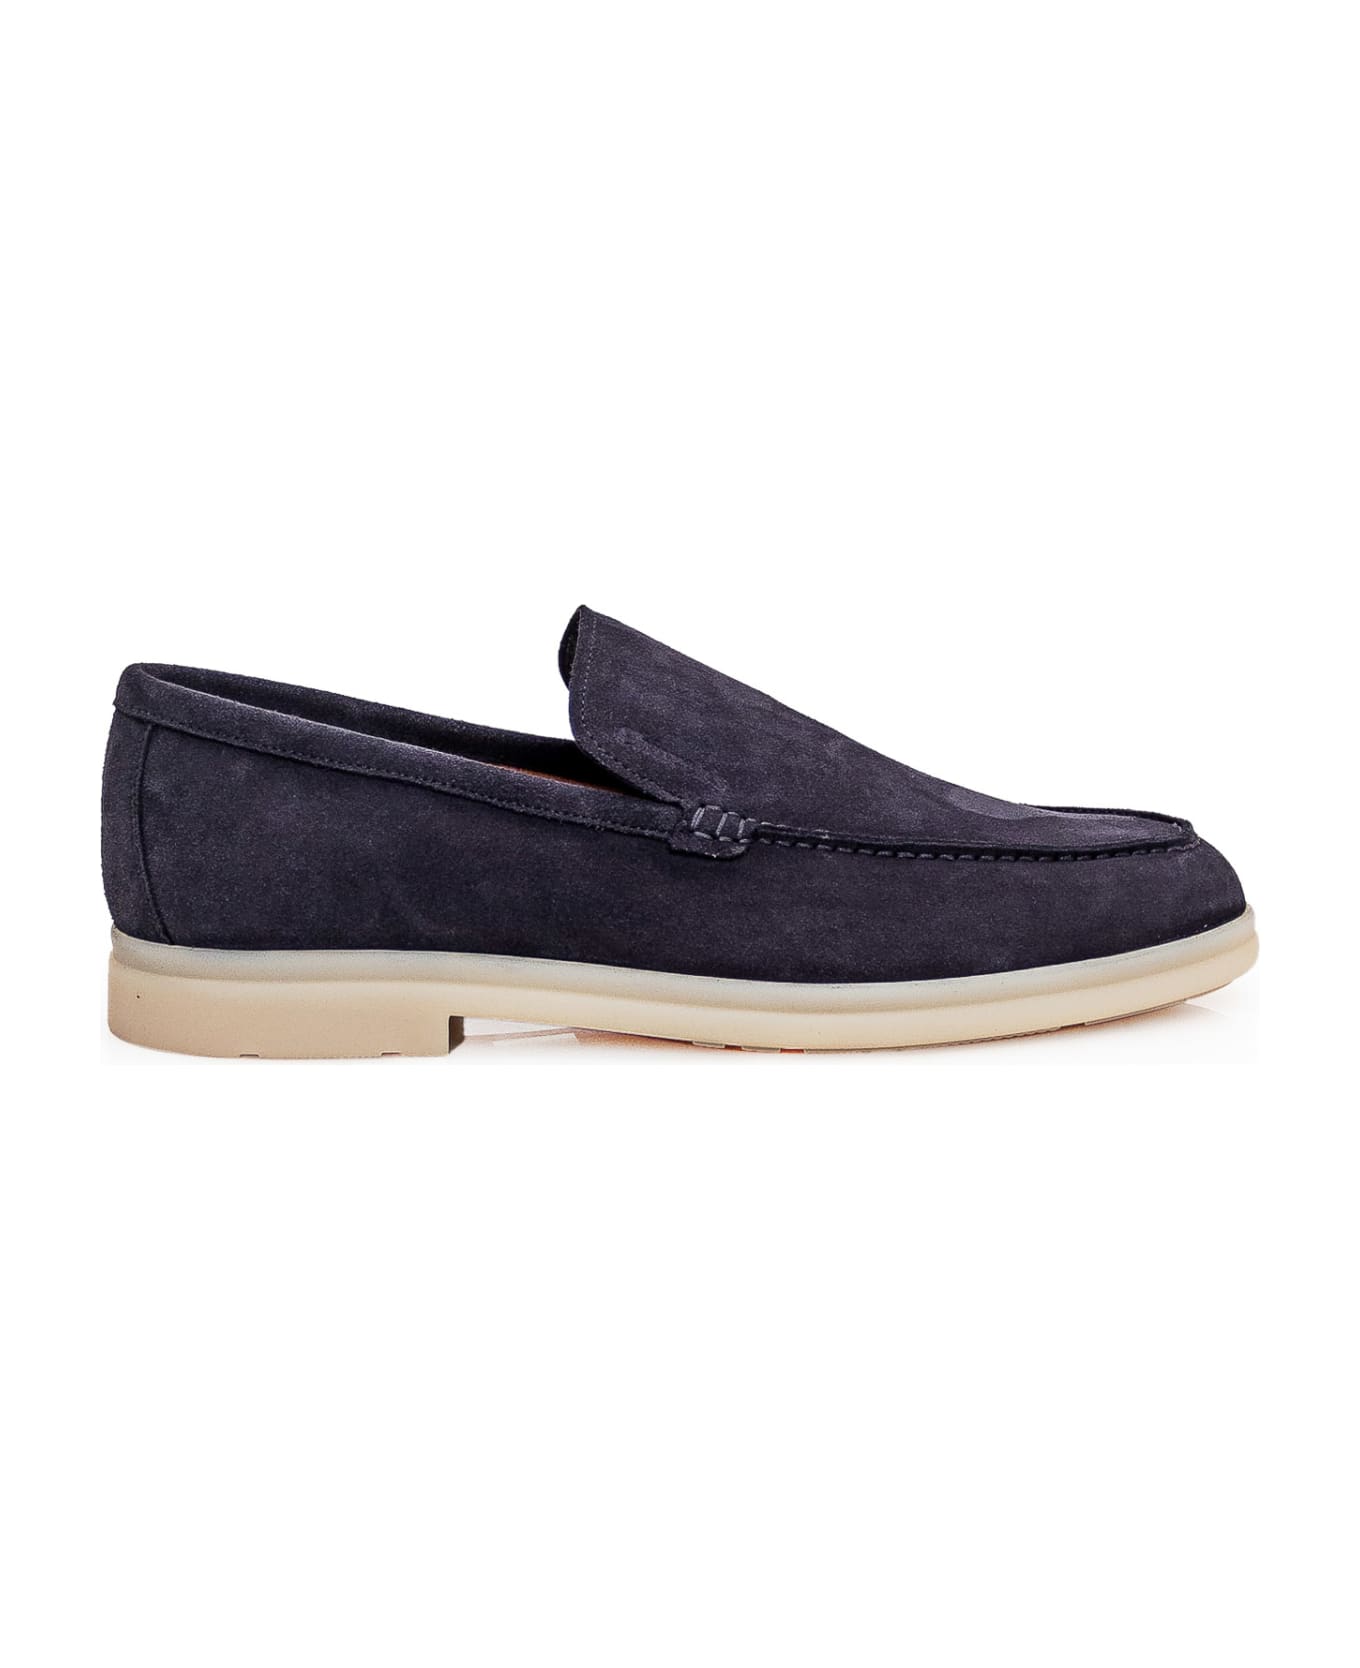 Church's Leather Loafer - NAVY